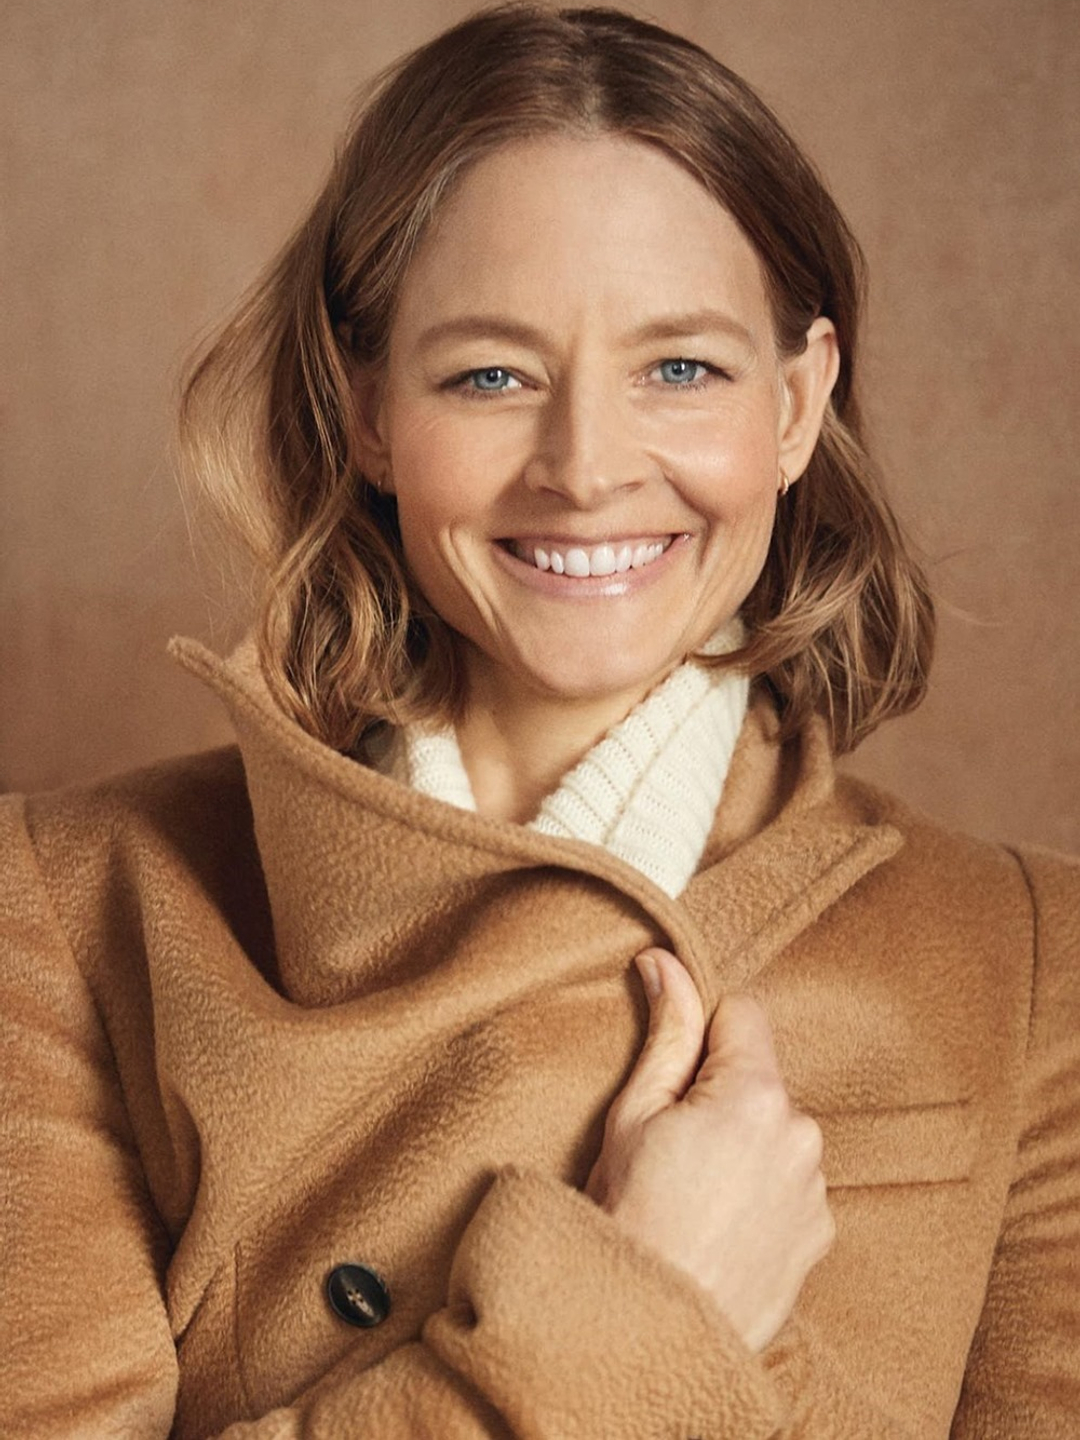 Jodie Foster young photos